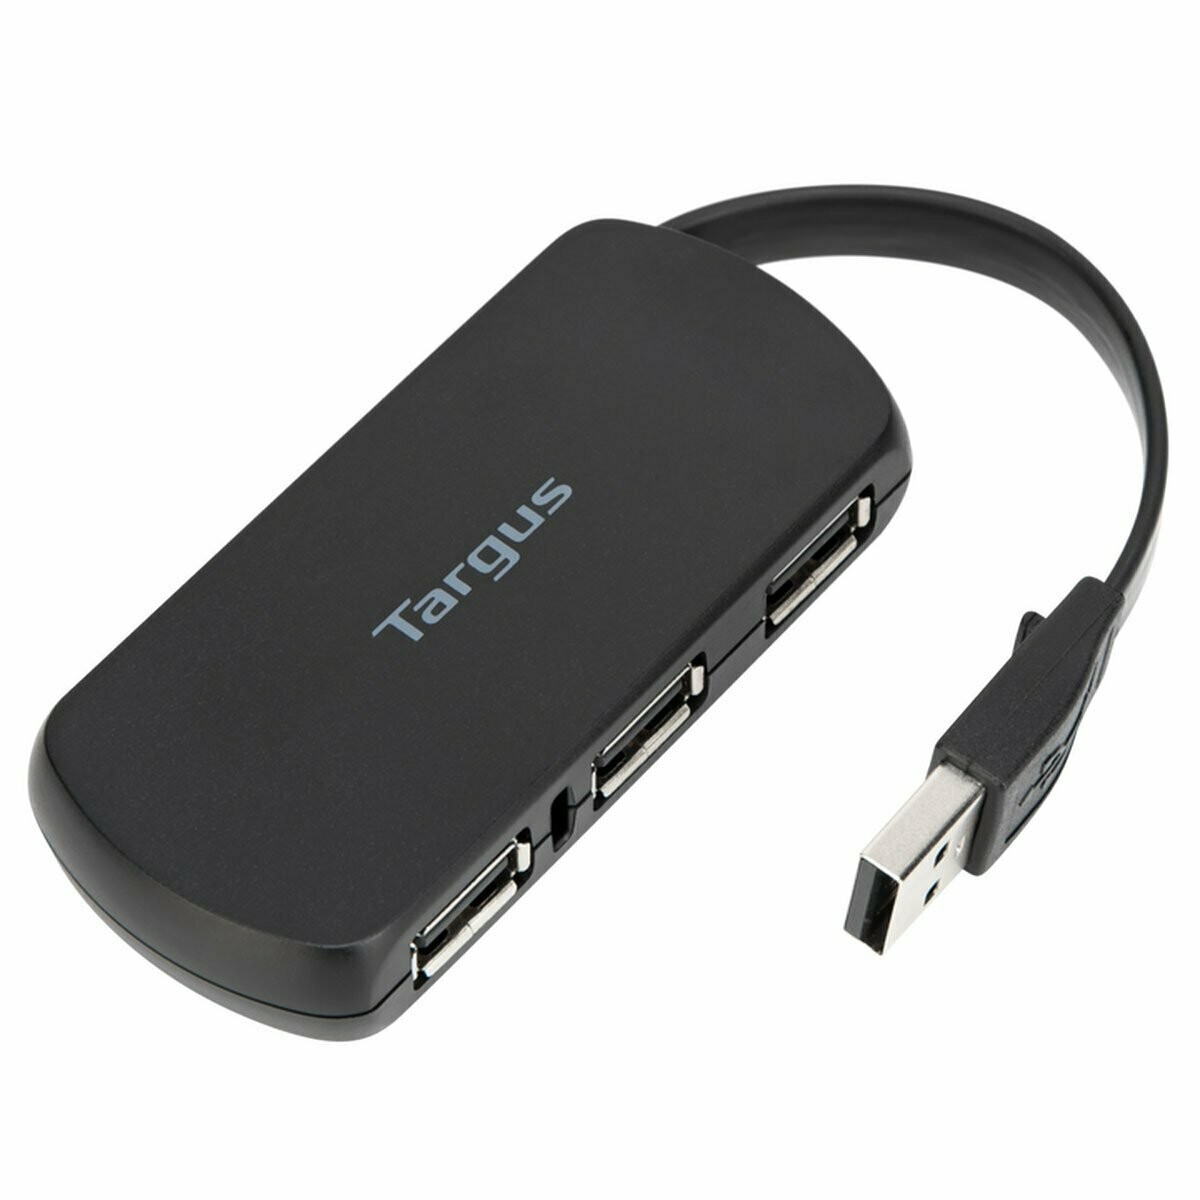 TARGUS 4 PORT VALUE HUBEXPAND1 USB PORT TO 4CABLE STORES UNDER HUB FOR TRAVEL